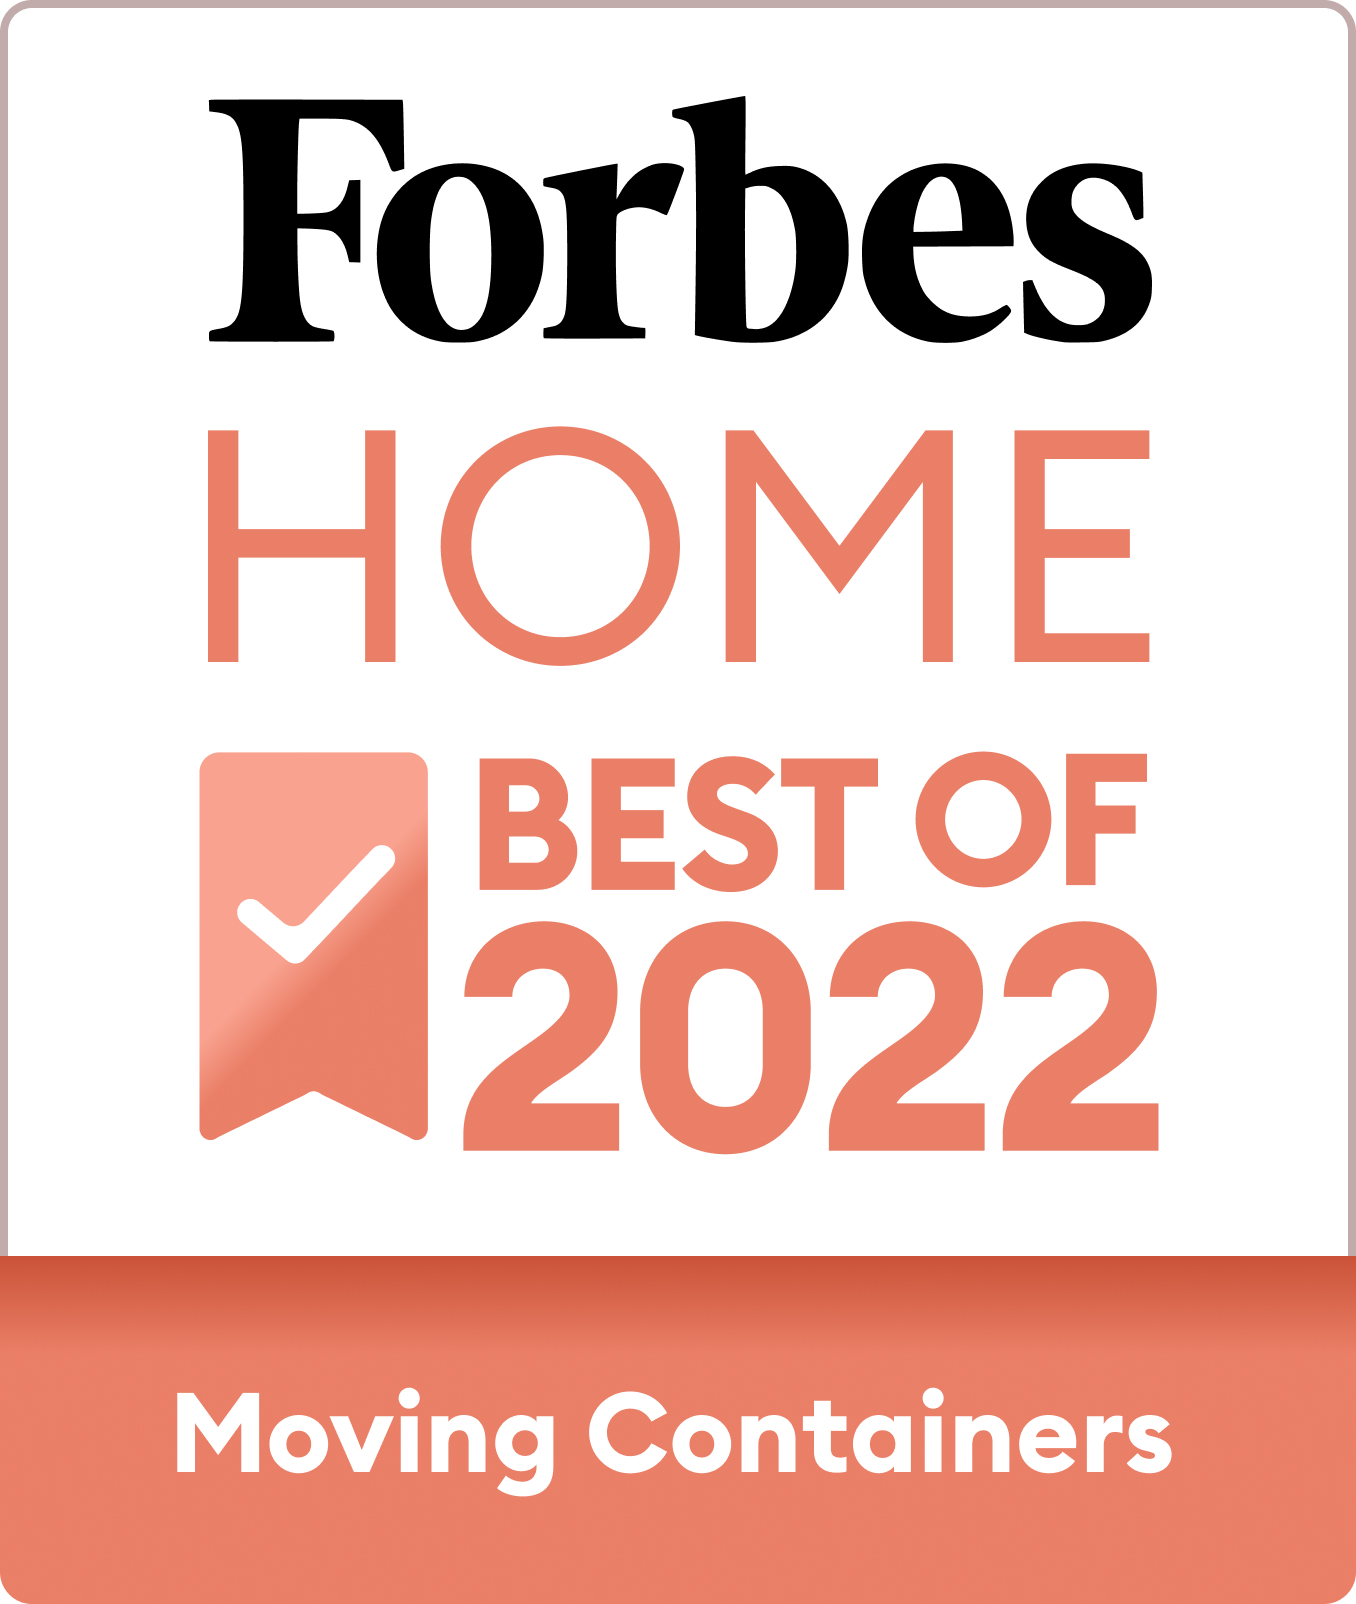 https://myuhaulstory.com/wp-content/uploads/Forbes-Home-Best-Moving-Containers-Of-2022-Category-Badge.jpg